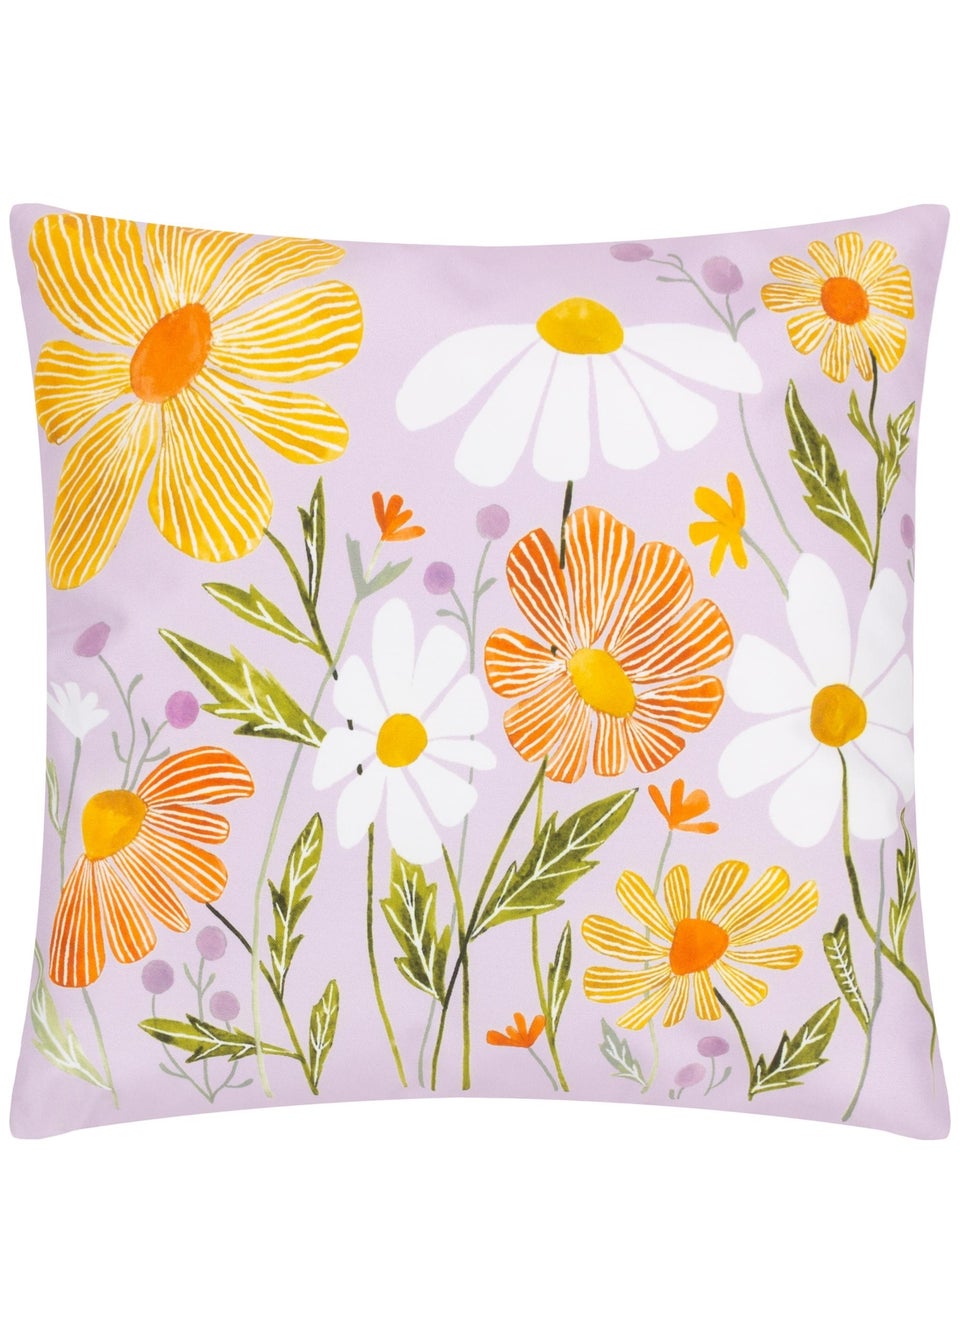 Wylder Nature Lilac Wildflower Filled Outdoor Cushions (43cm x 43cm x 8cm)